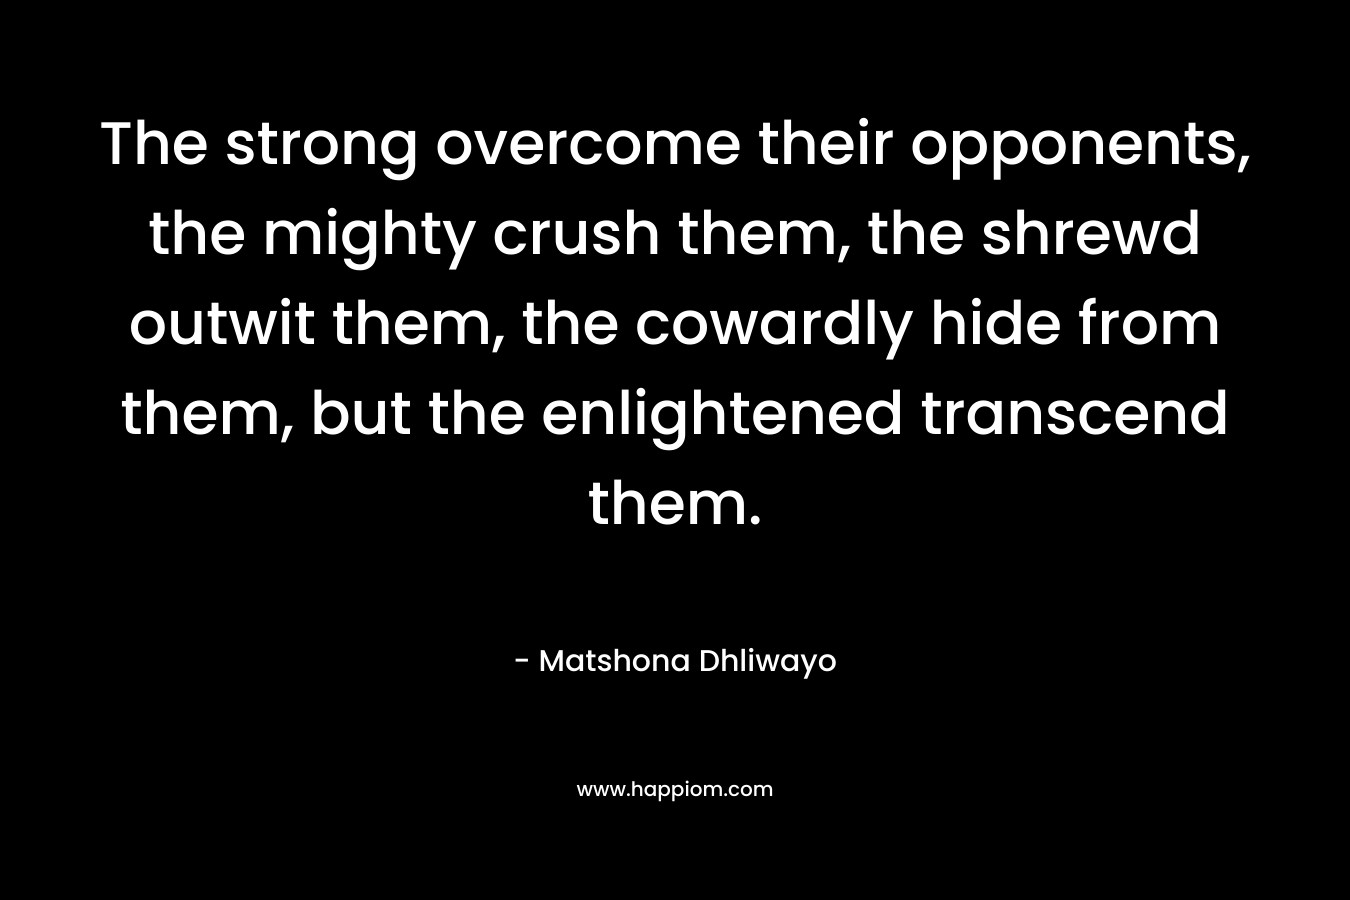 The strong overcome their opponents, the mighty crush them, the shrewd outwit them, the cowardly hide from them, but the enlightened transcend them.